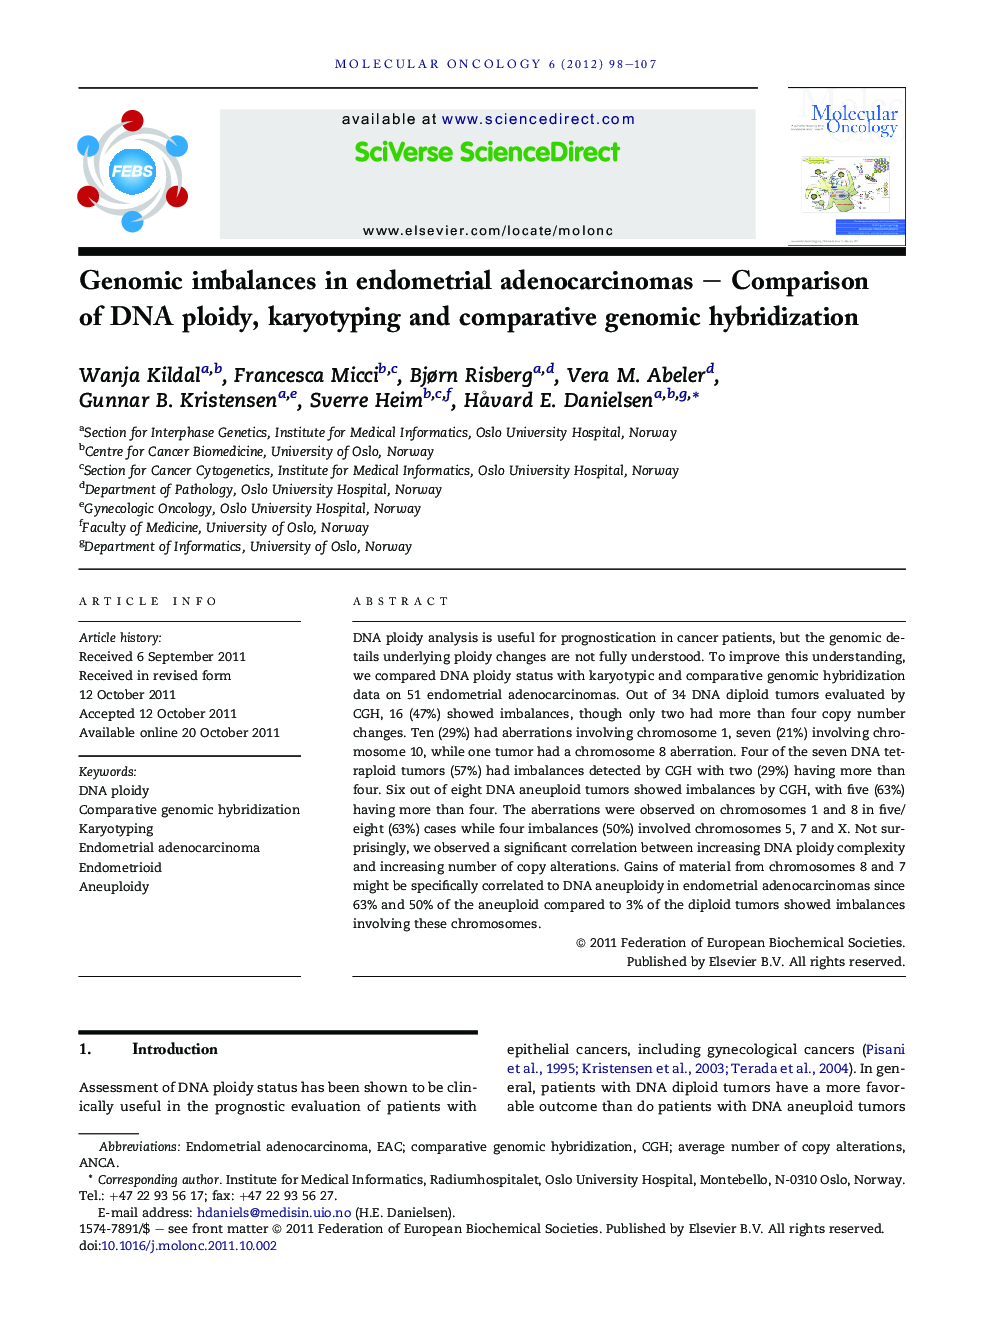 Genomic imbalances in endometrial adenocarcinomas – Comparison of DNA ploidy, karyotyping and comparative genomic hybridization